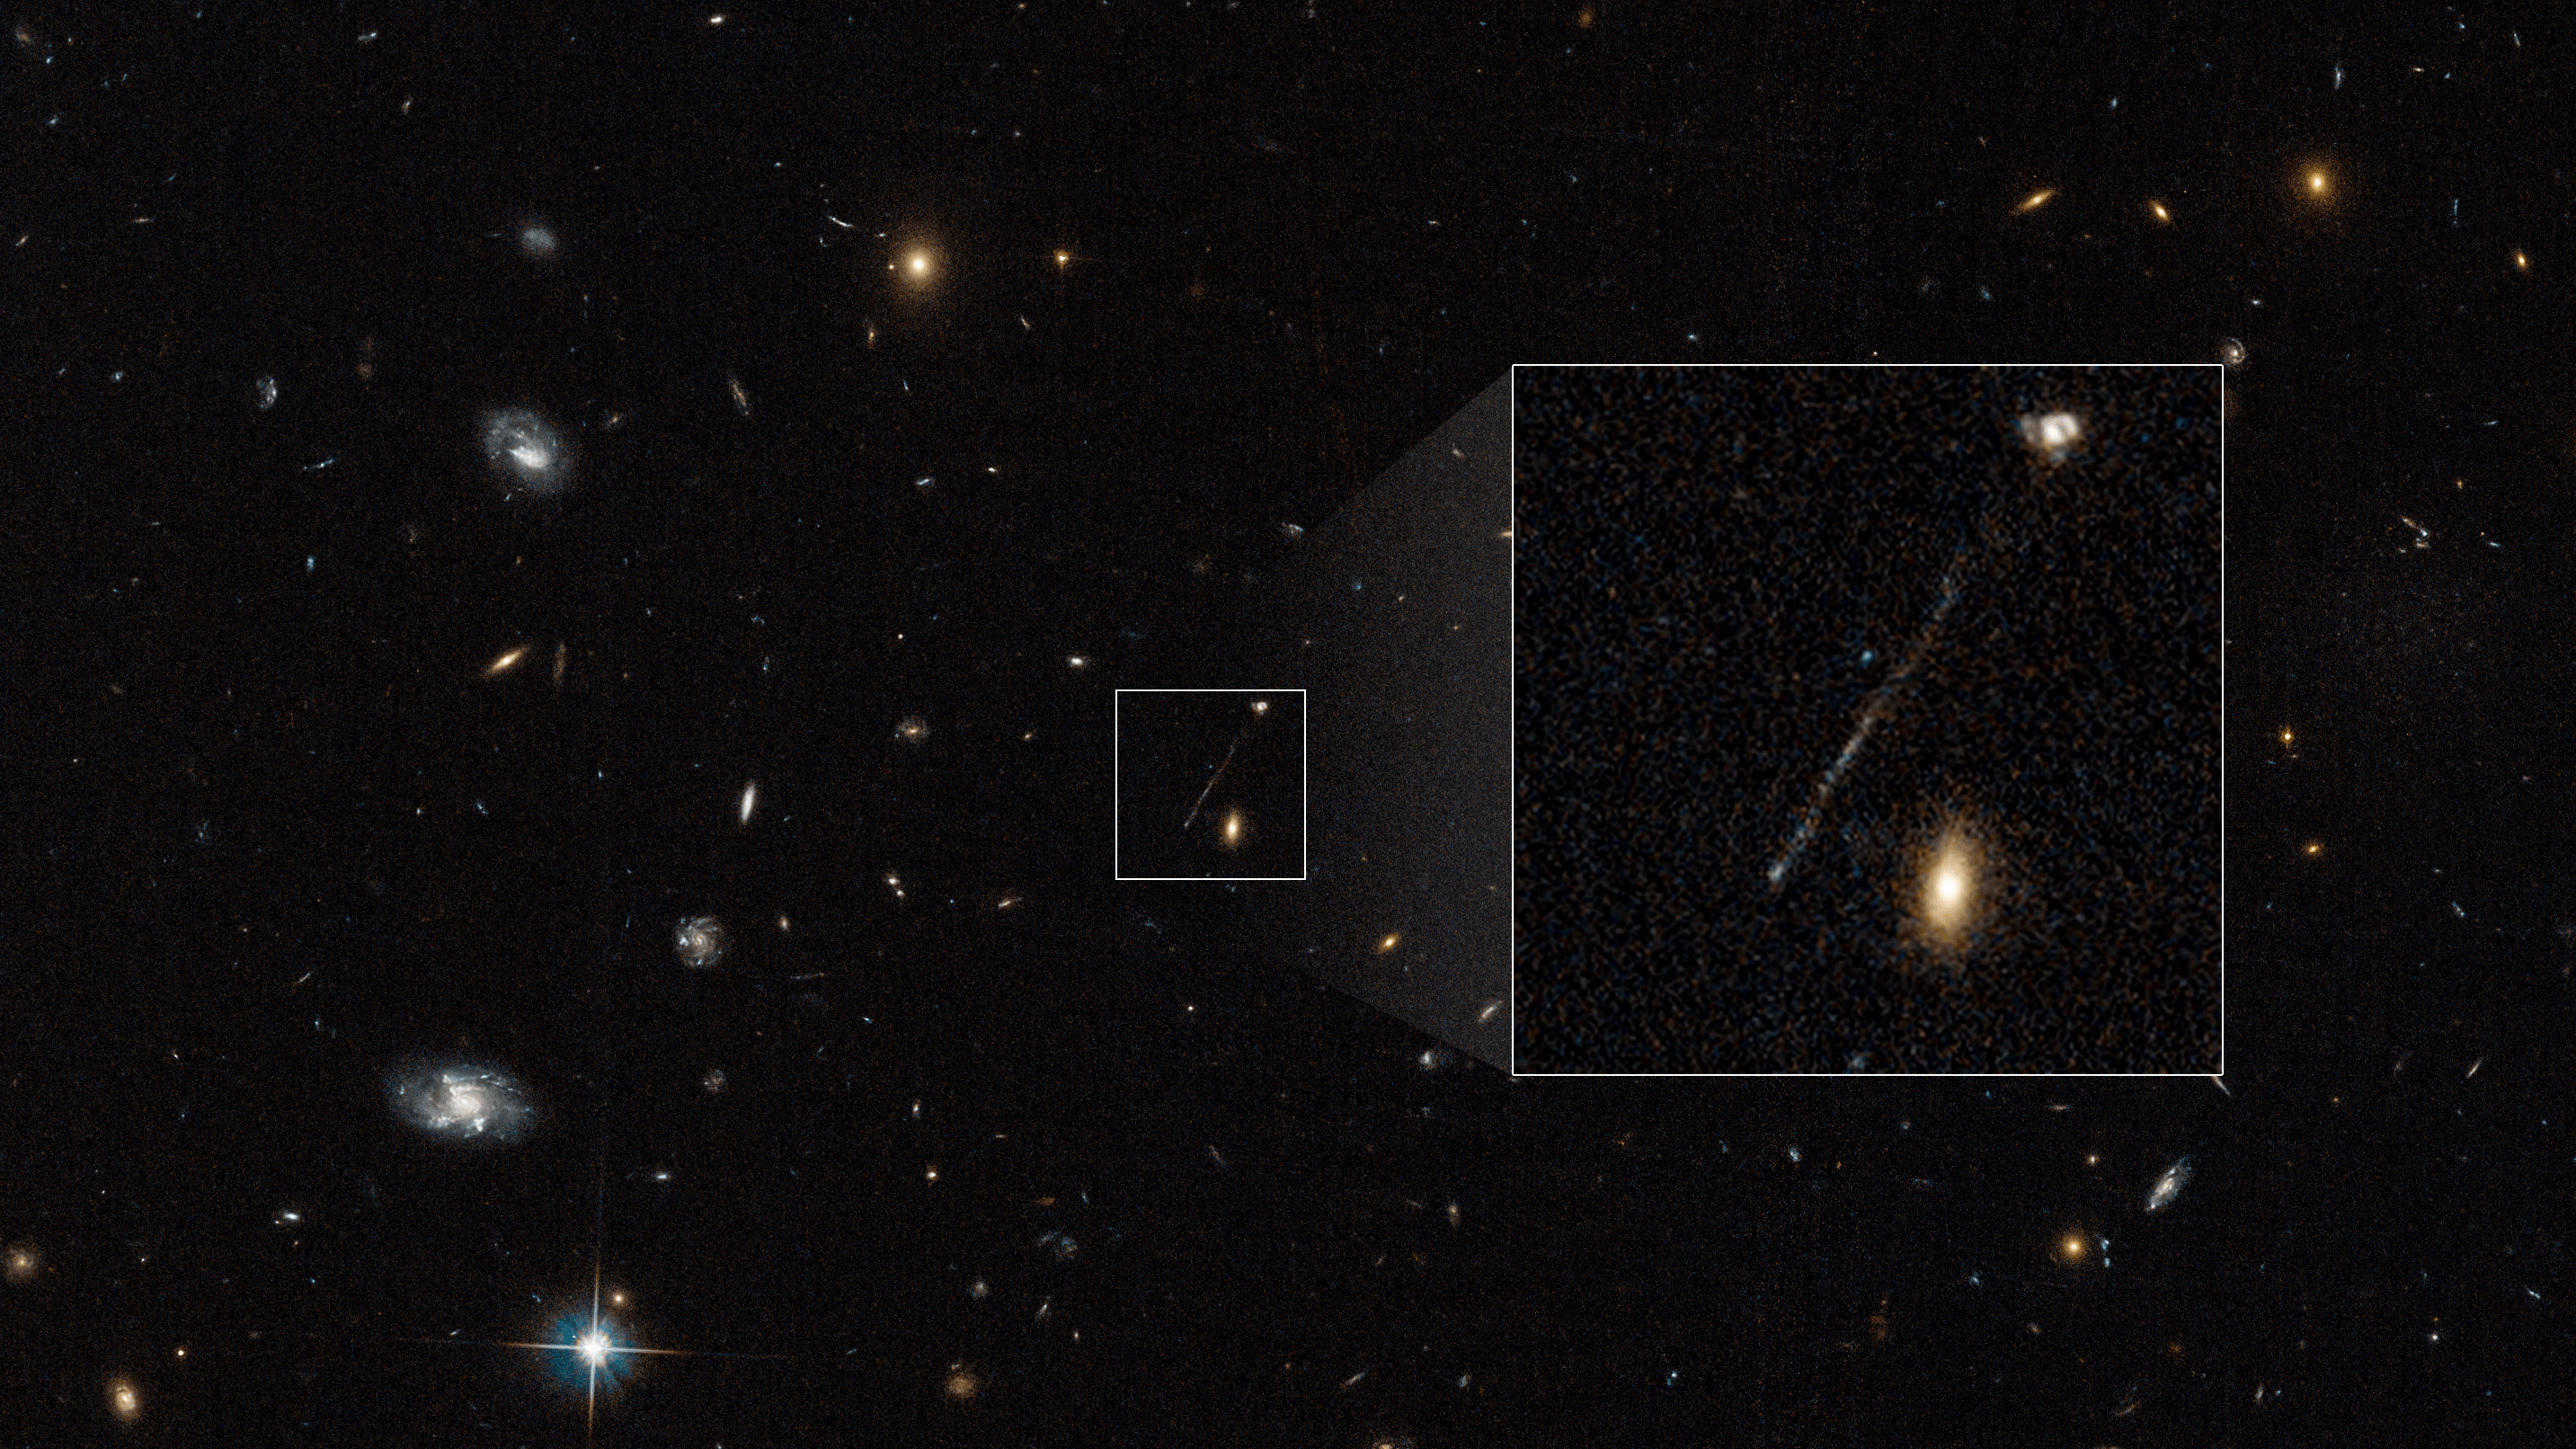 Hubble image of black, deep-space field with white, yellow, and reddish galaxies. Image center: small, white-bordered, boxed area that contains one, long, thin, diagonal streak of whitish-blue stars. Two galaxies also reside within the box.